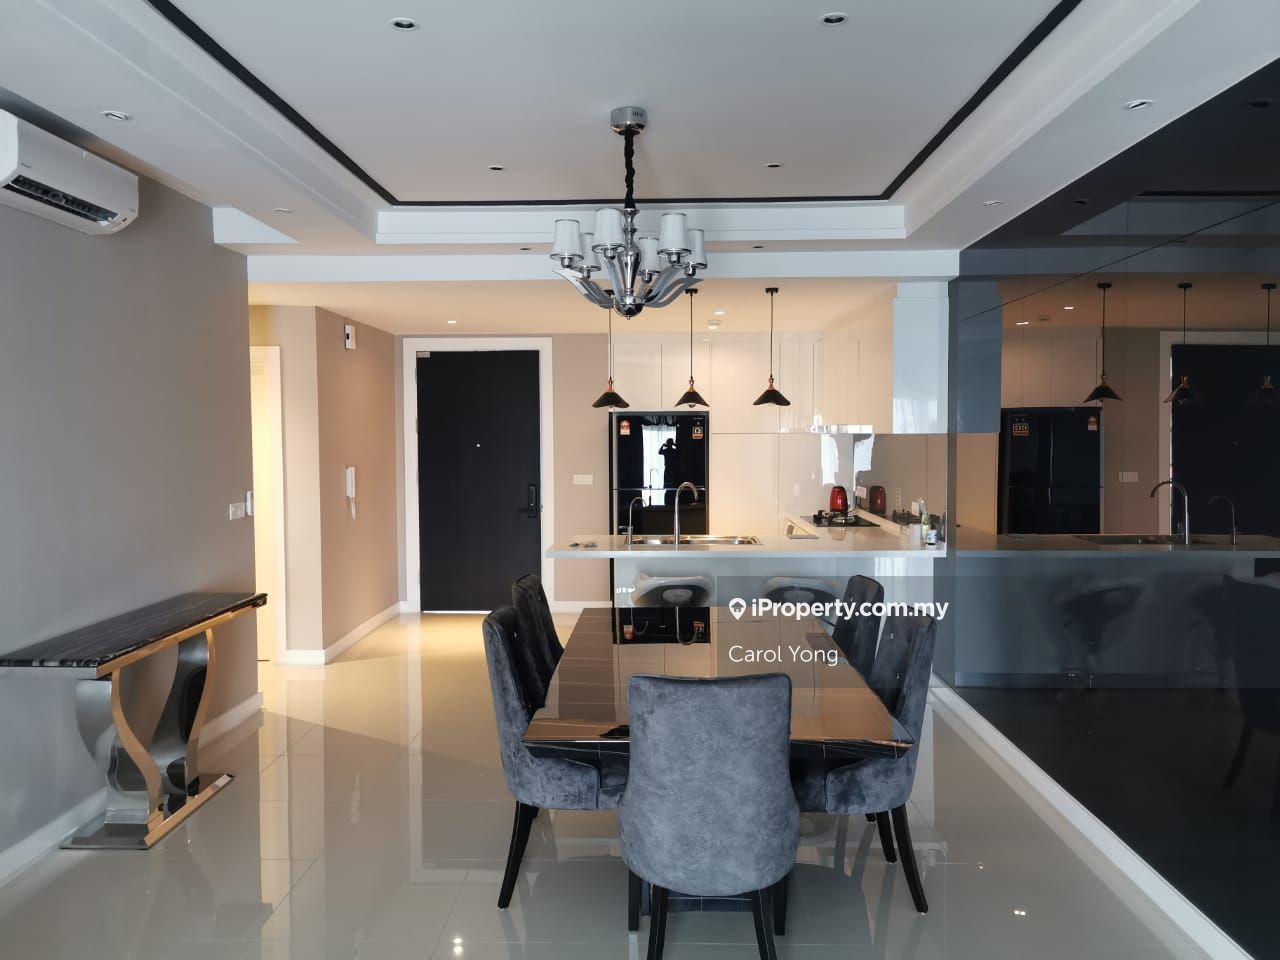 Westside Three, Desa ParkCity for rent - RM5000 | iProperty Malaysia